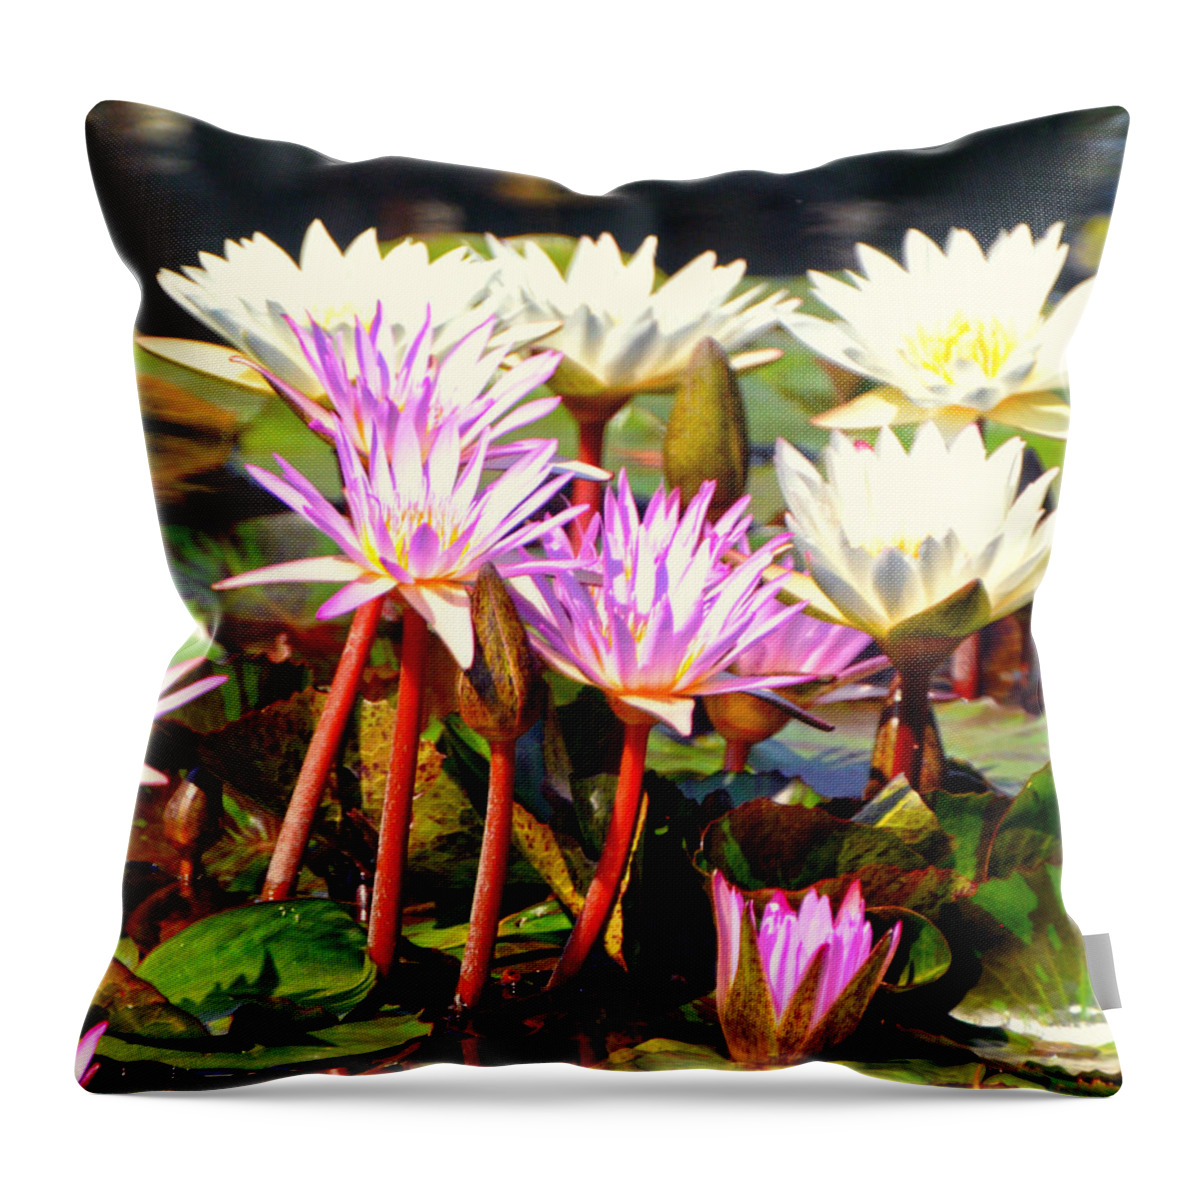 Flowers Throw Pillow featuring the photograph Beauty on the Water by Marty Koch